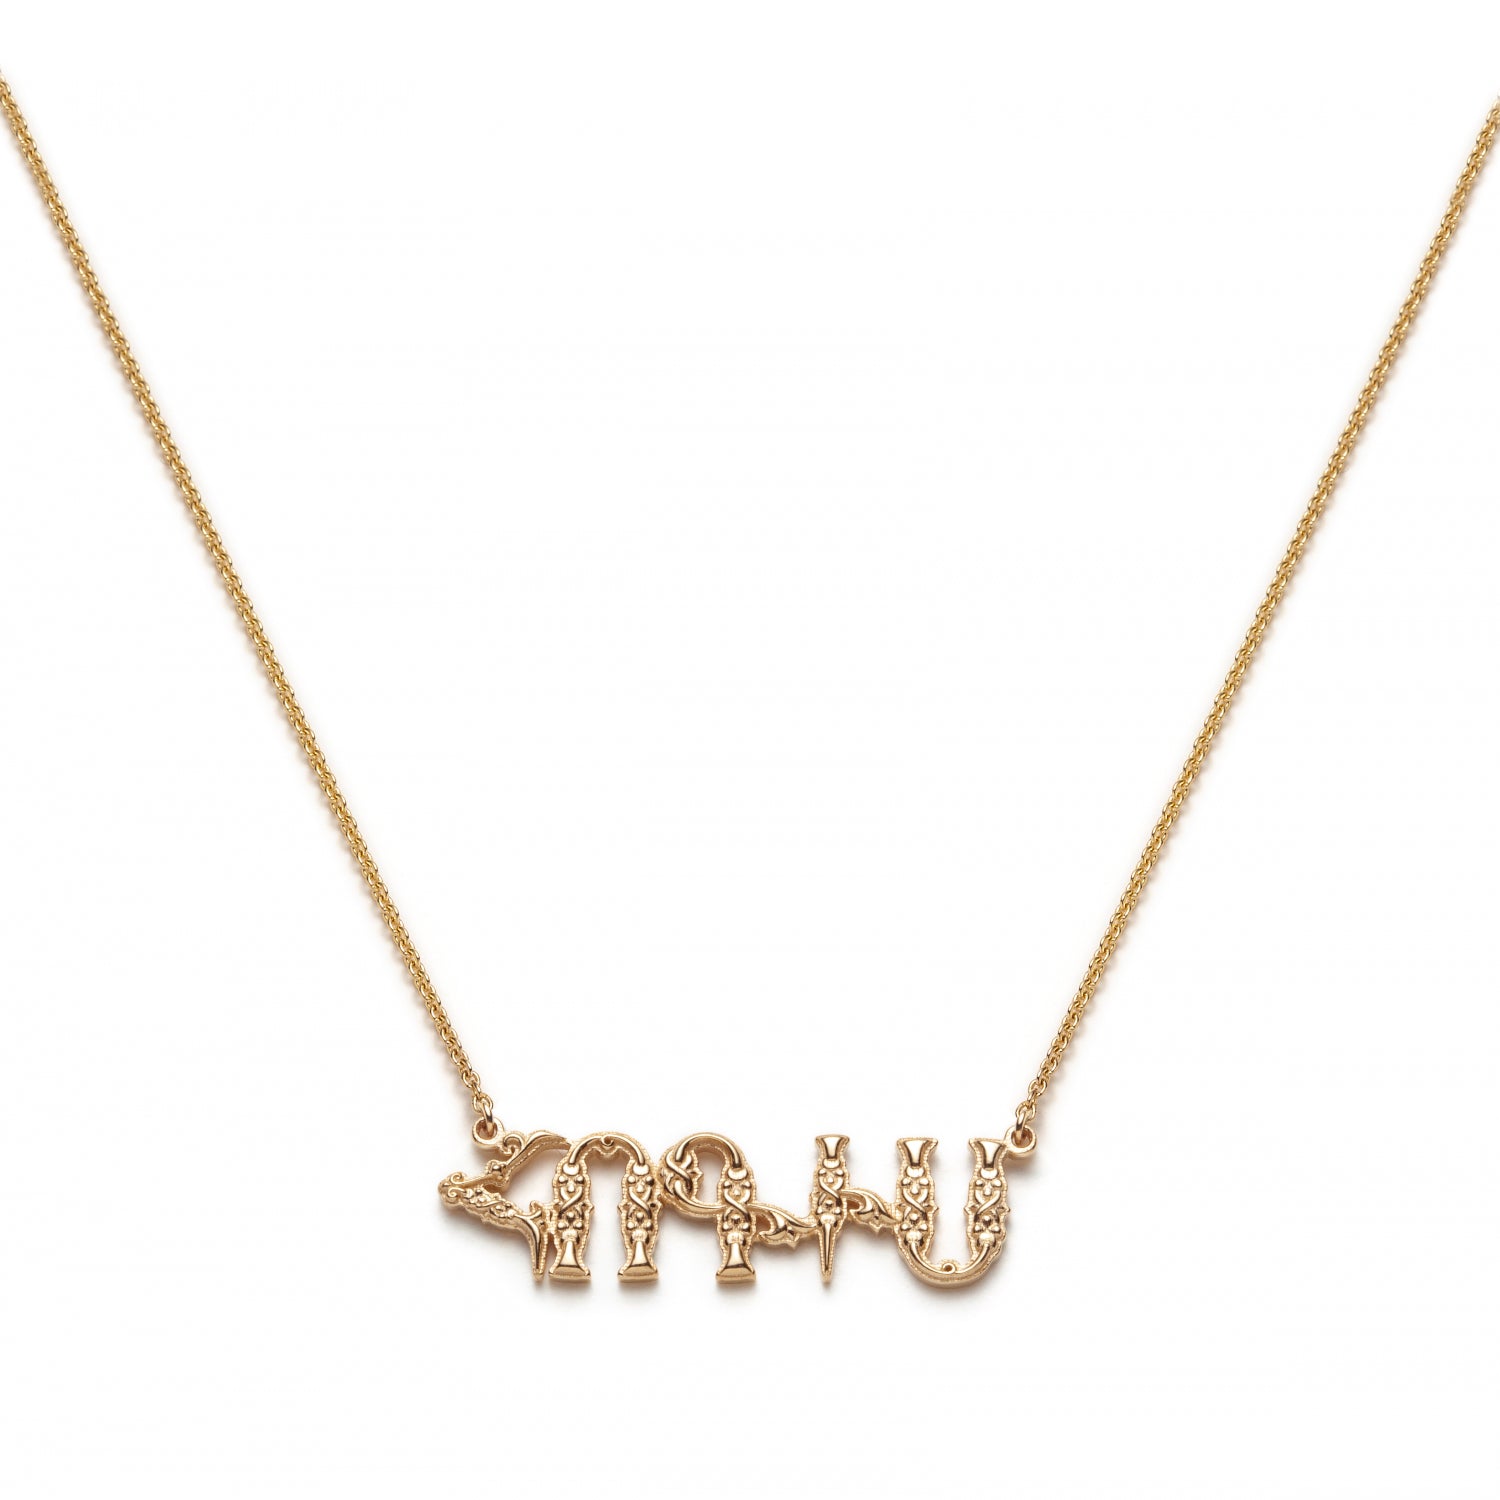 "Hokis" - My Soul Armenian Necklace in Yellow Gold